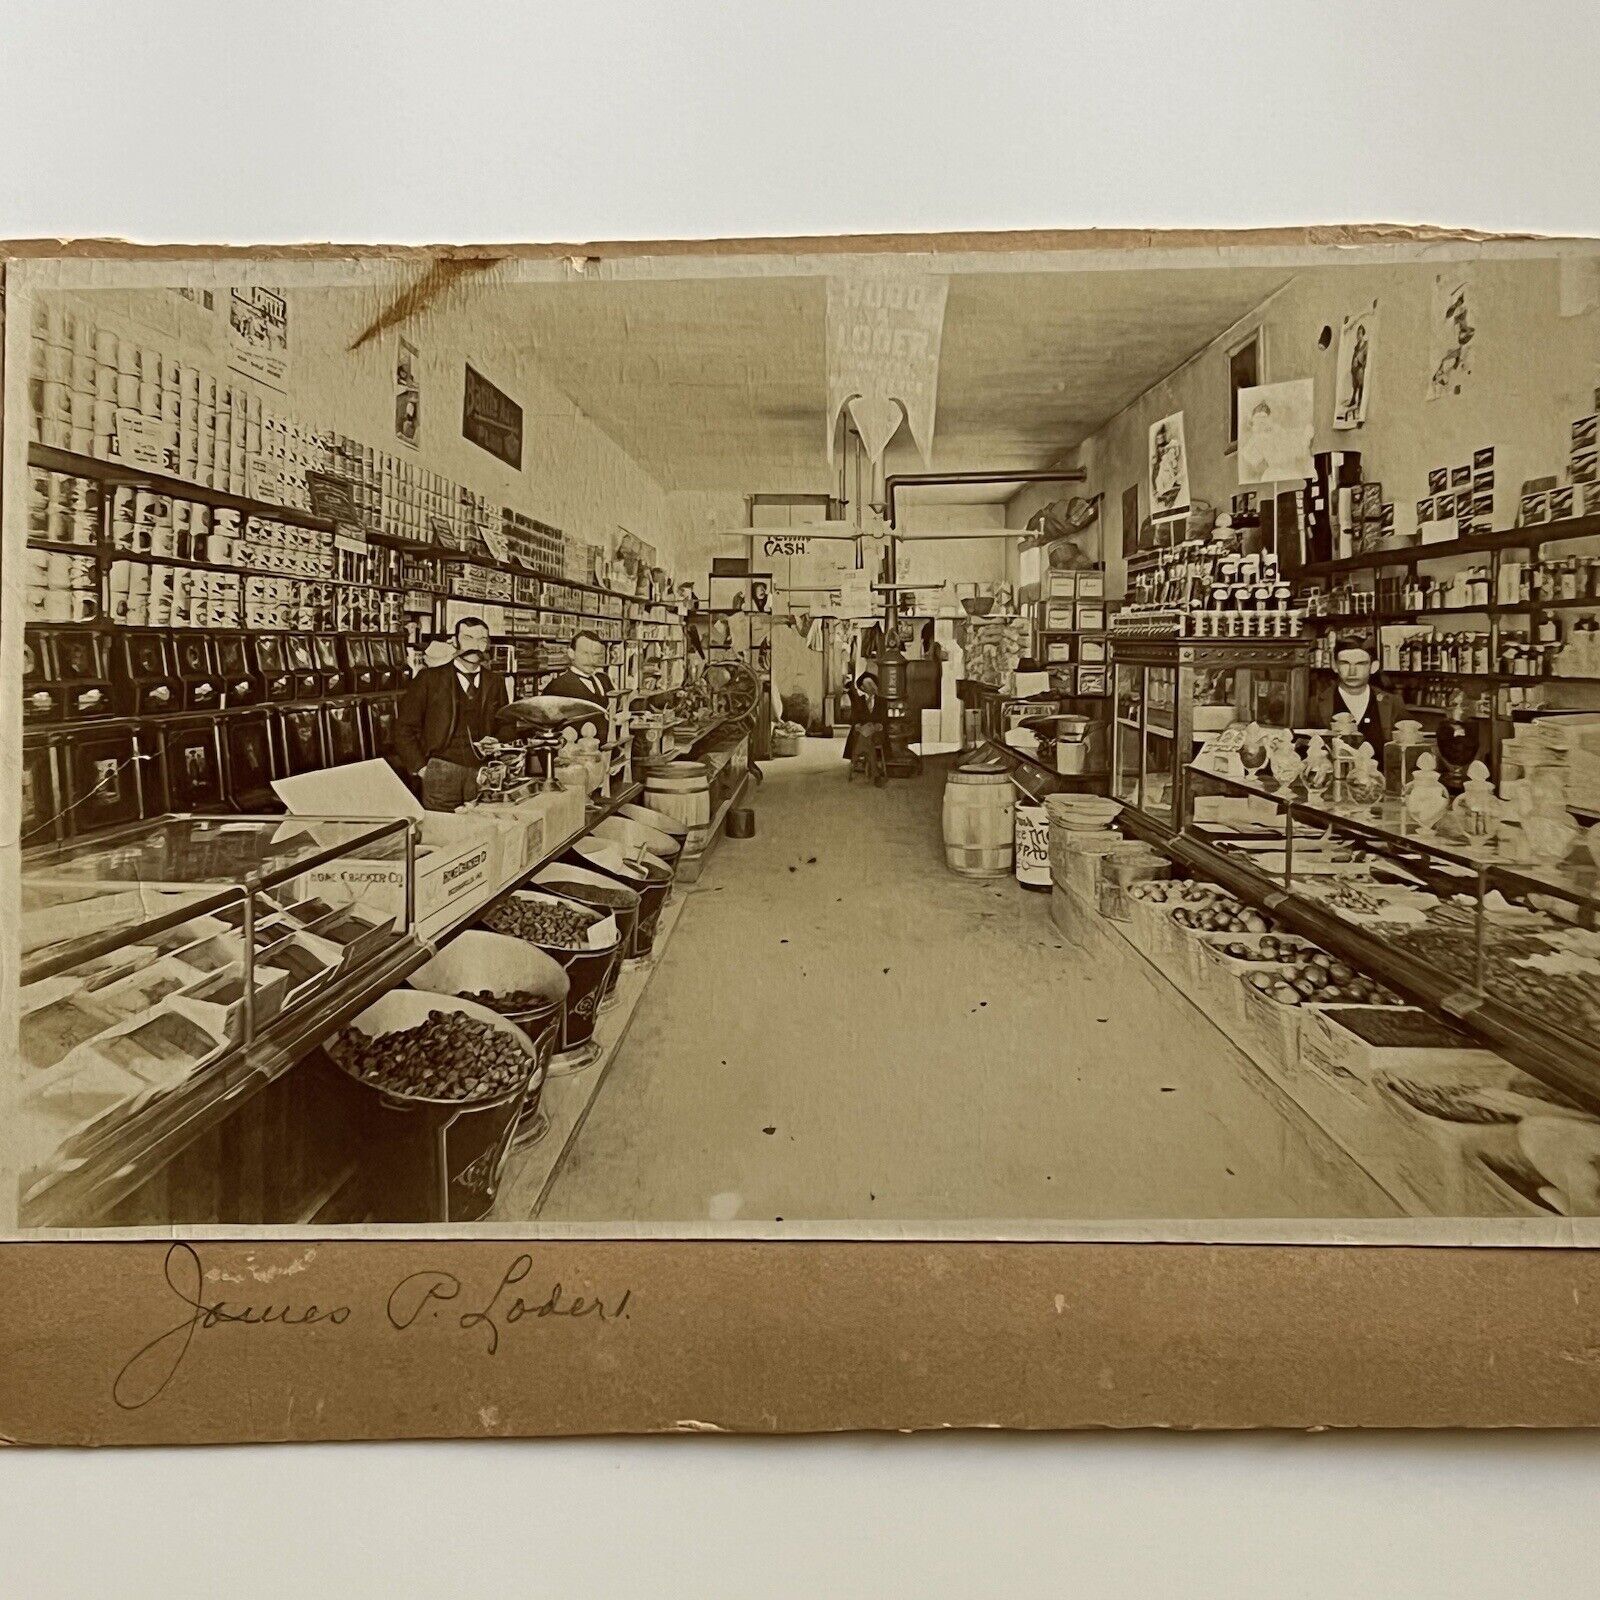 Antique Cabinet Card Photograph ID Loder General Grocery Store Indianapolis IN